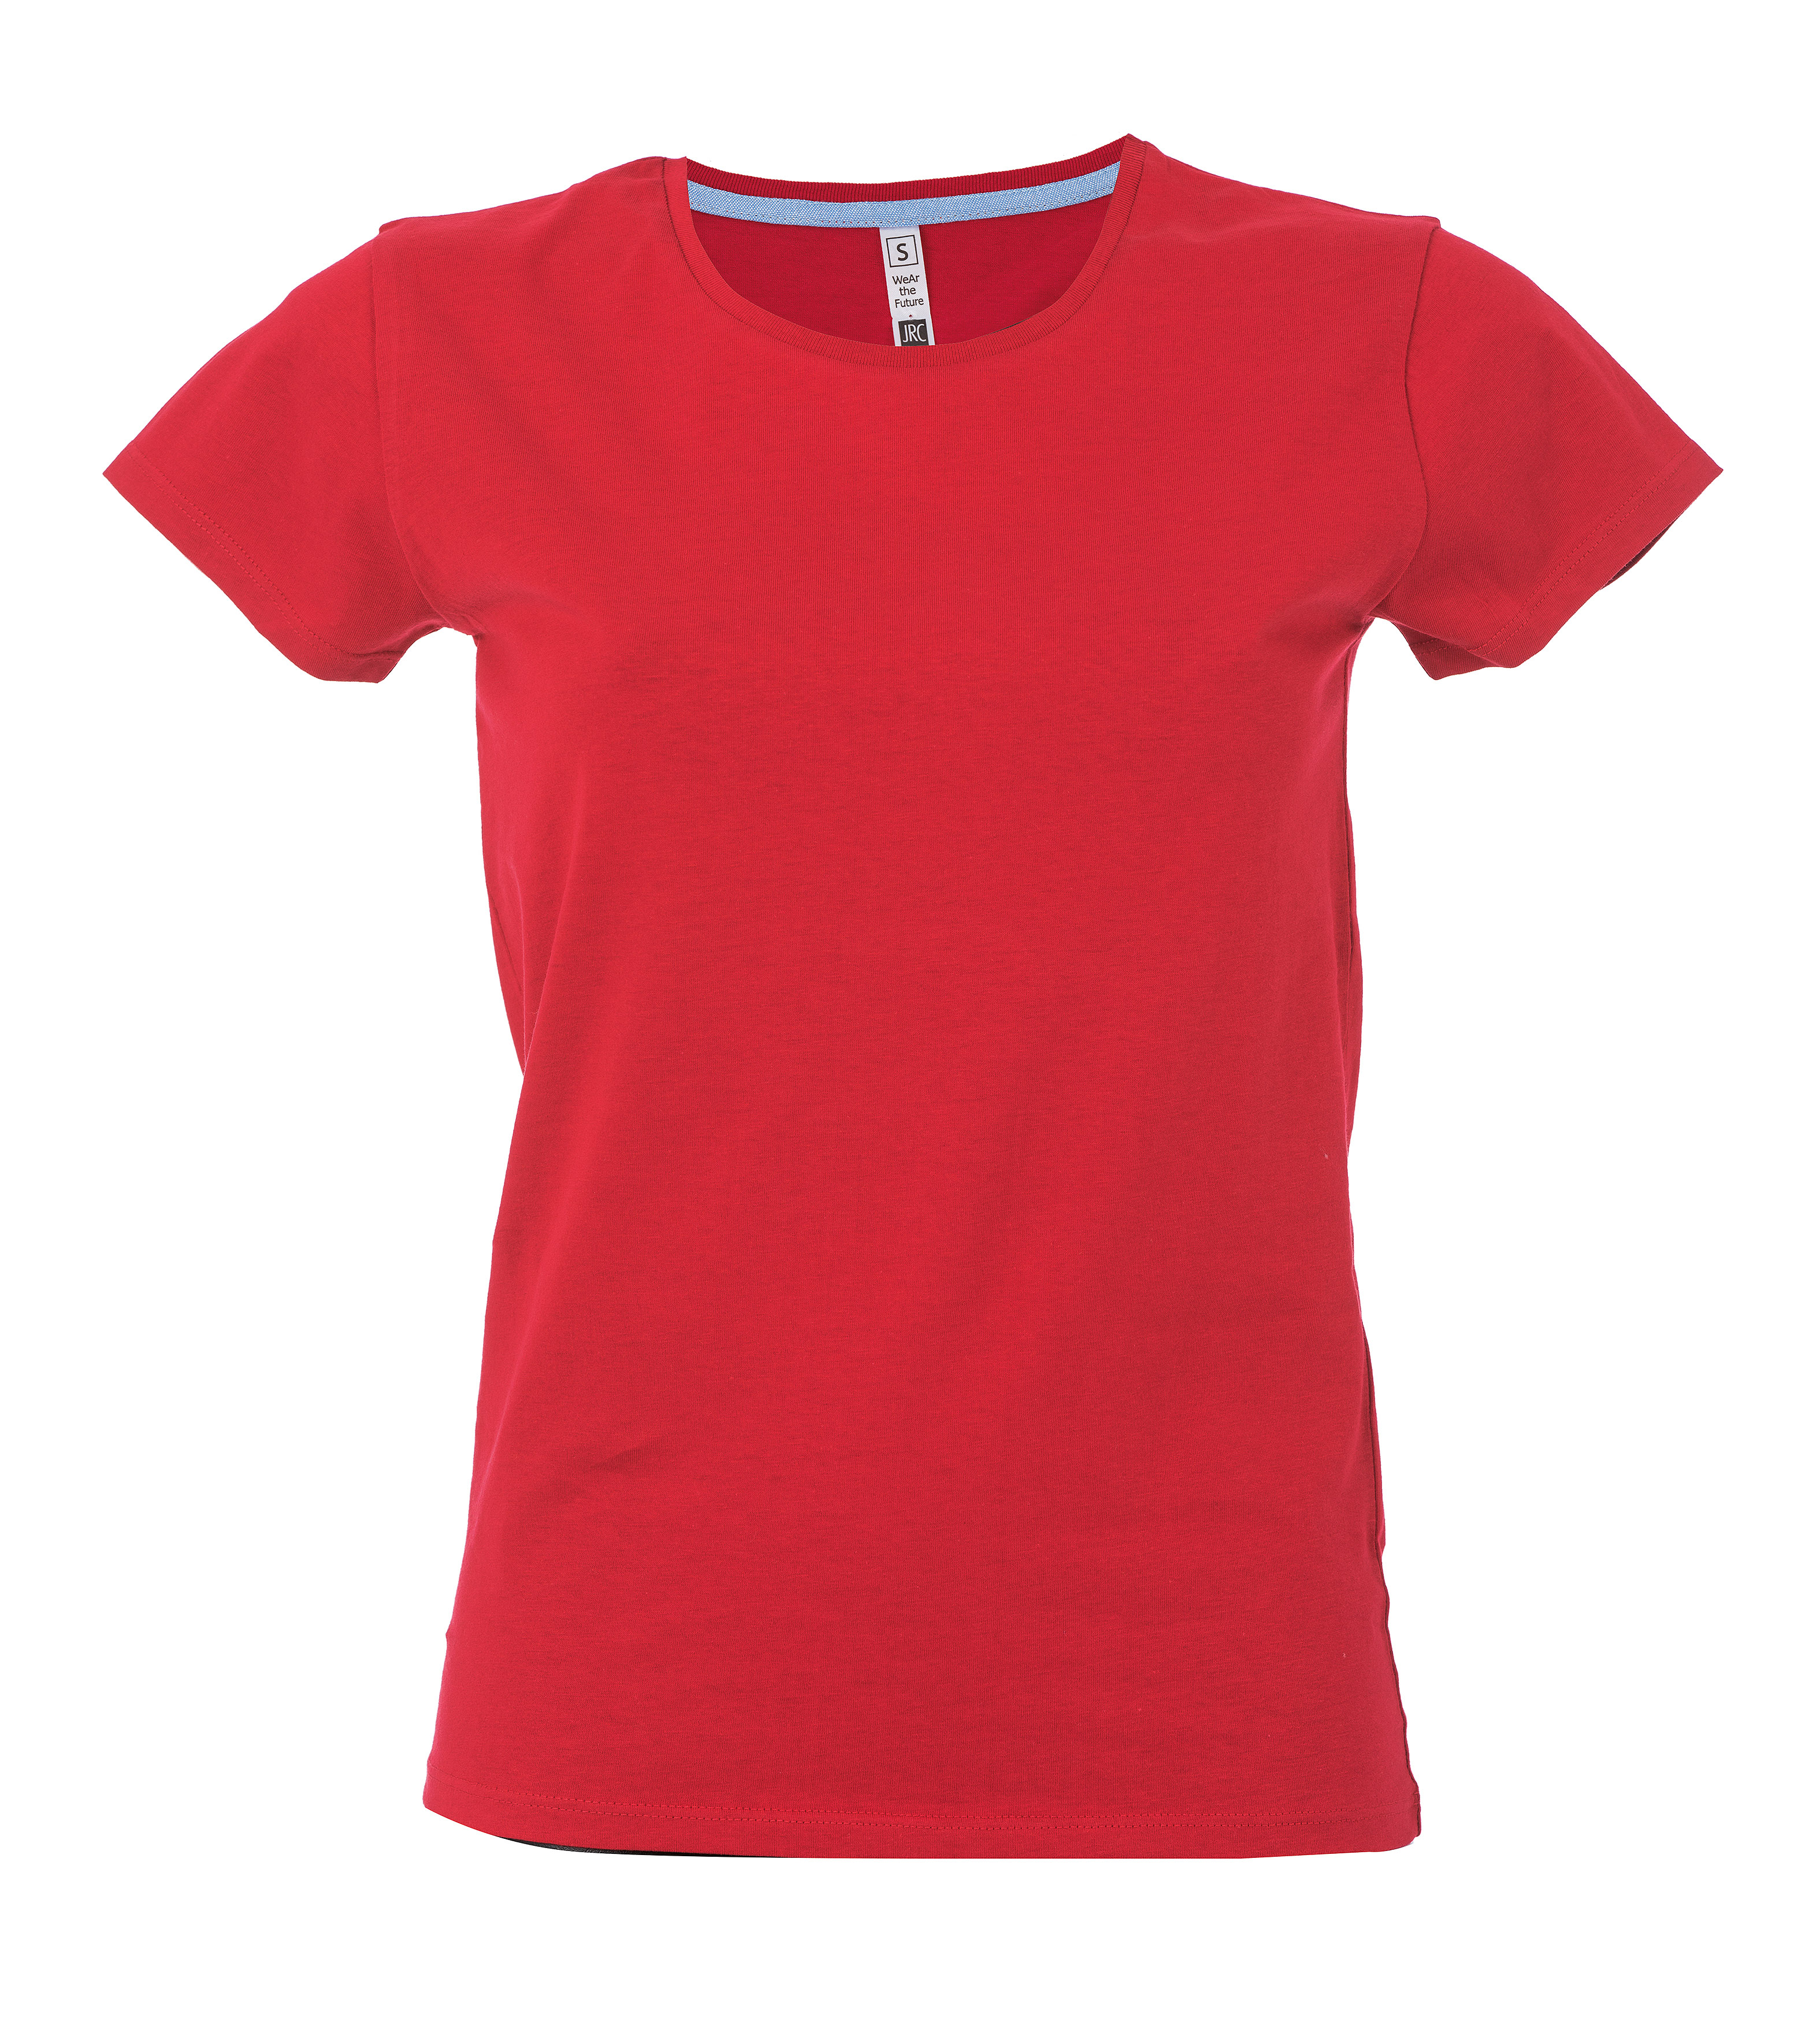 T-shirt California Lady (variante colore: red)